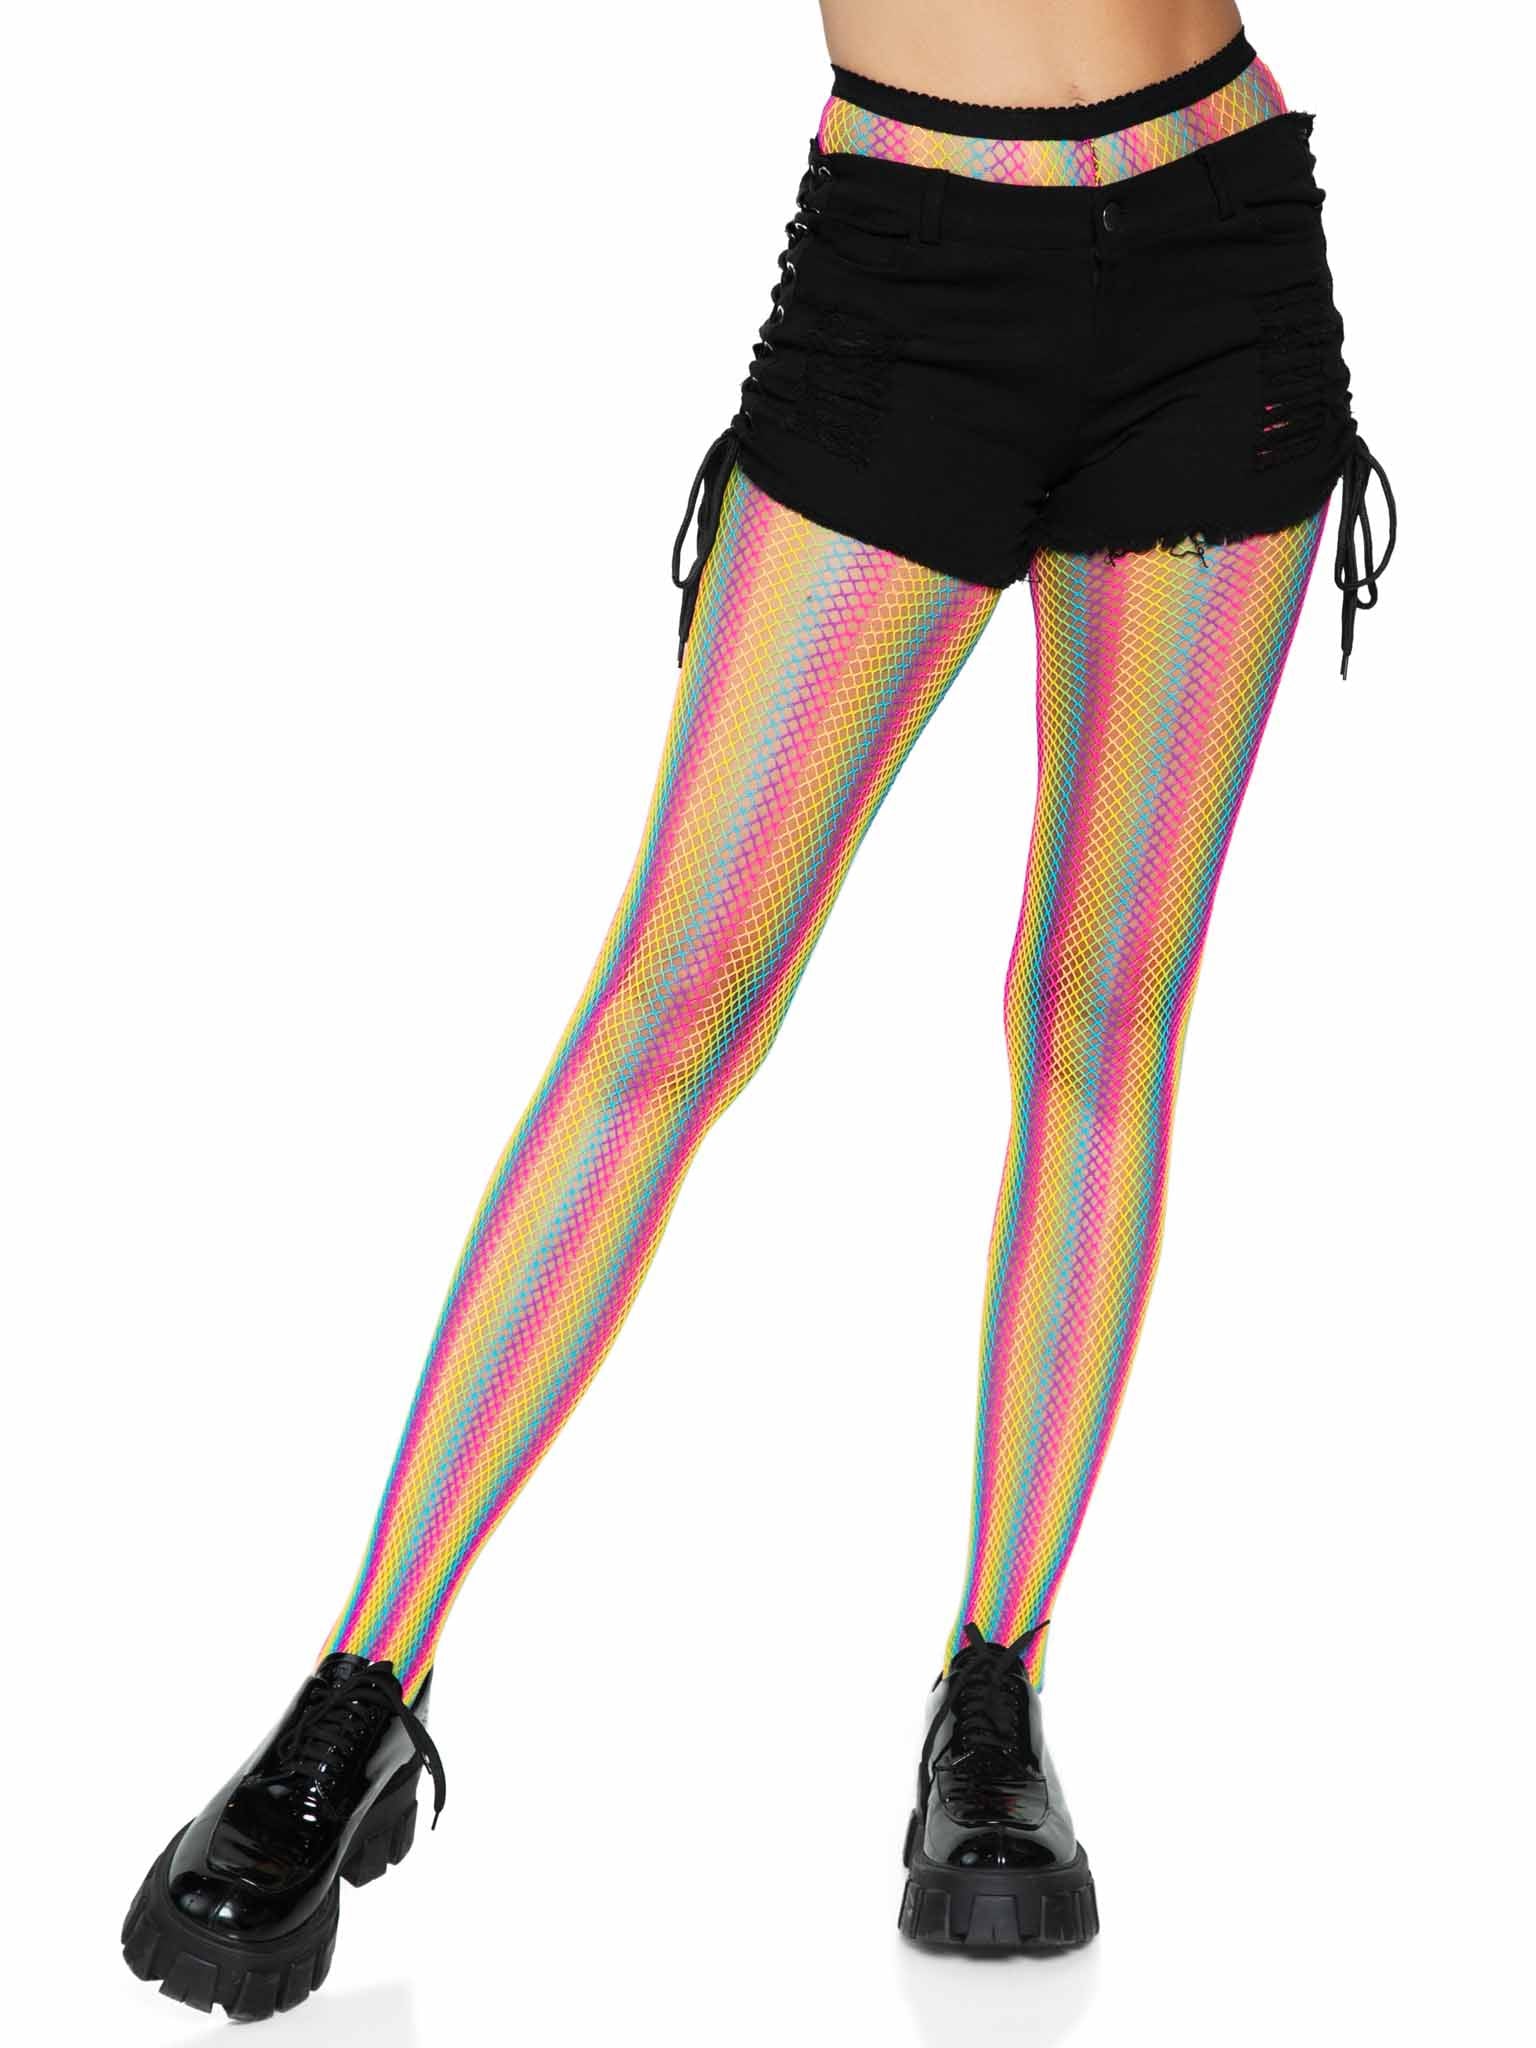 Neon Rainbow Striped Fishnet Tights - One Size -  Multicolor-1